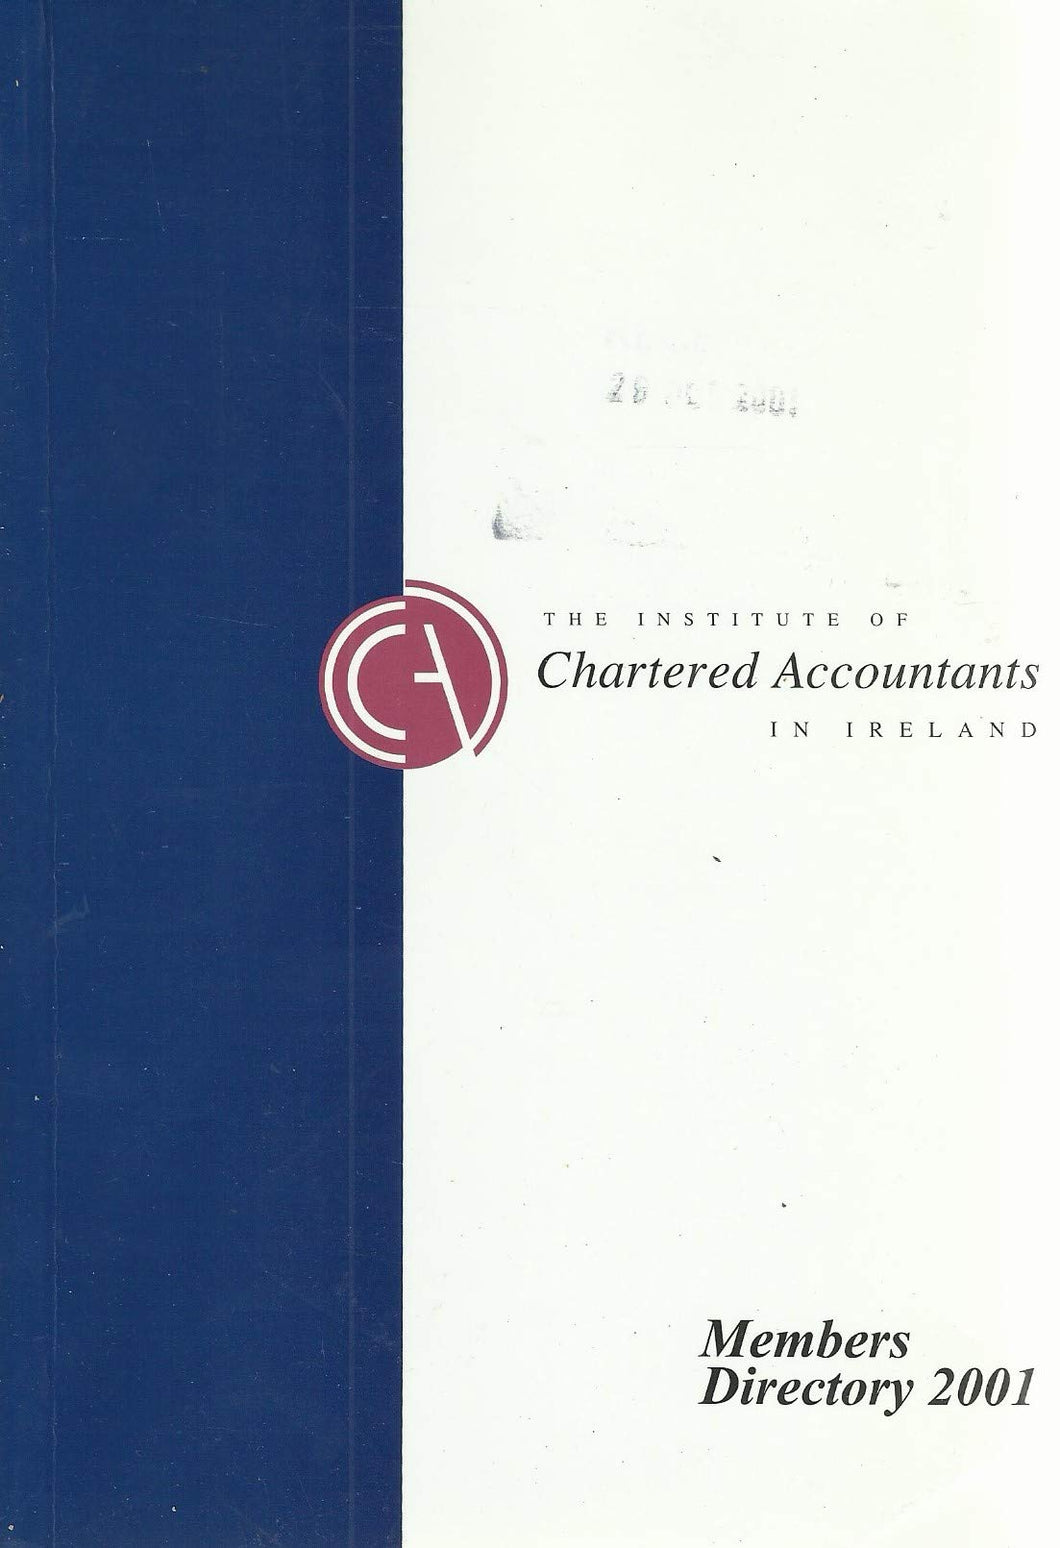 The Institute of Chartered Accountants in Ireland Members Directory 2001 (Members' Directory)